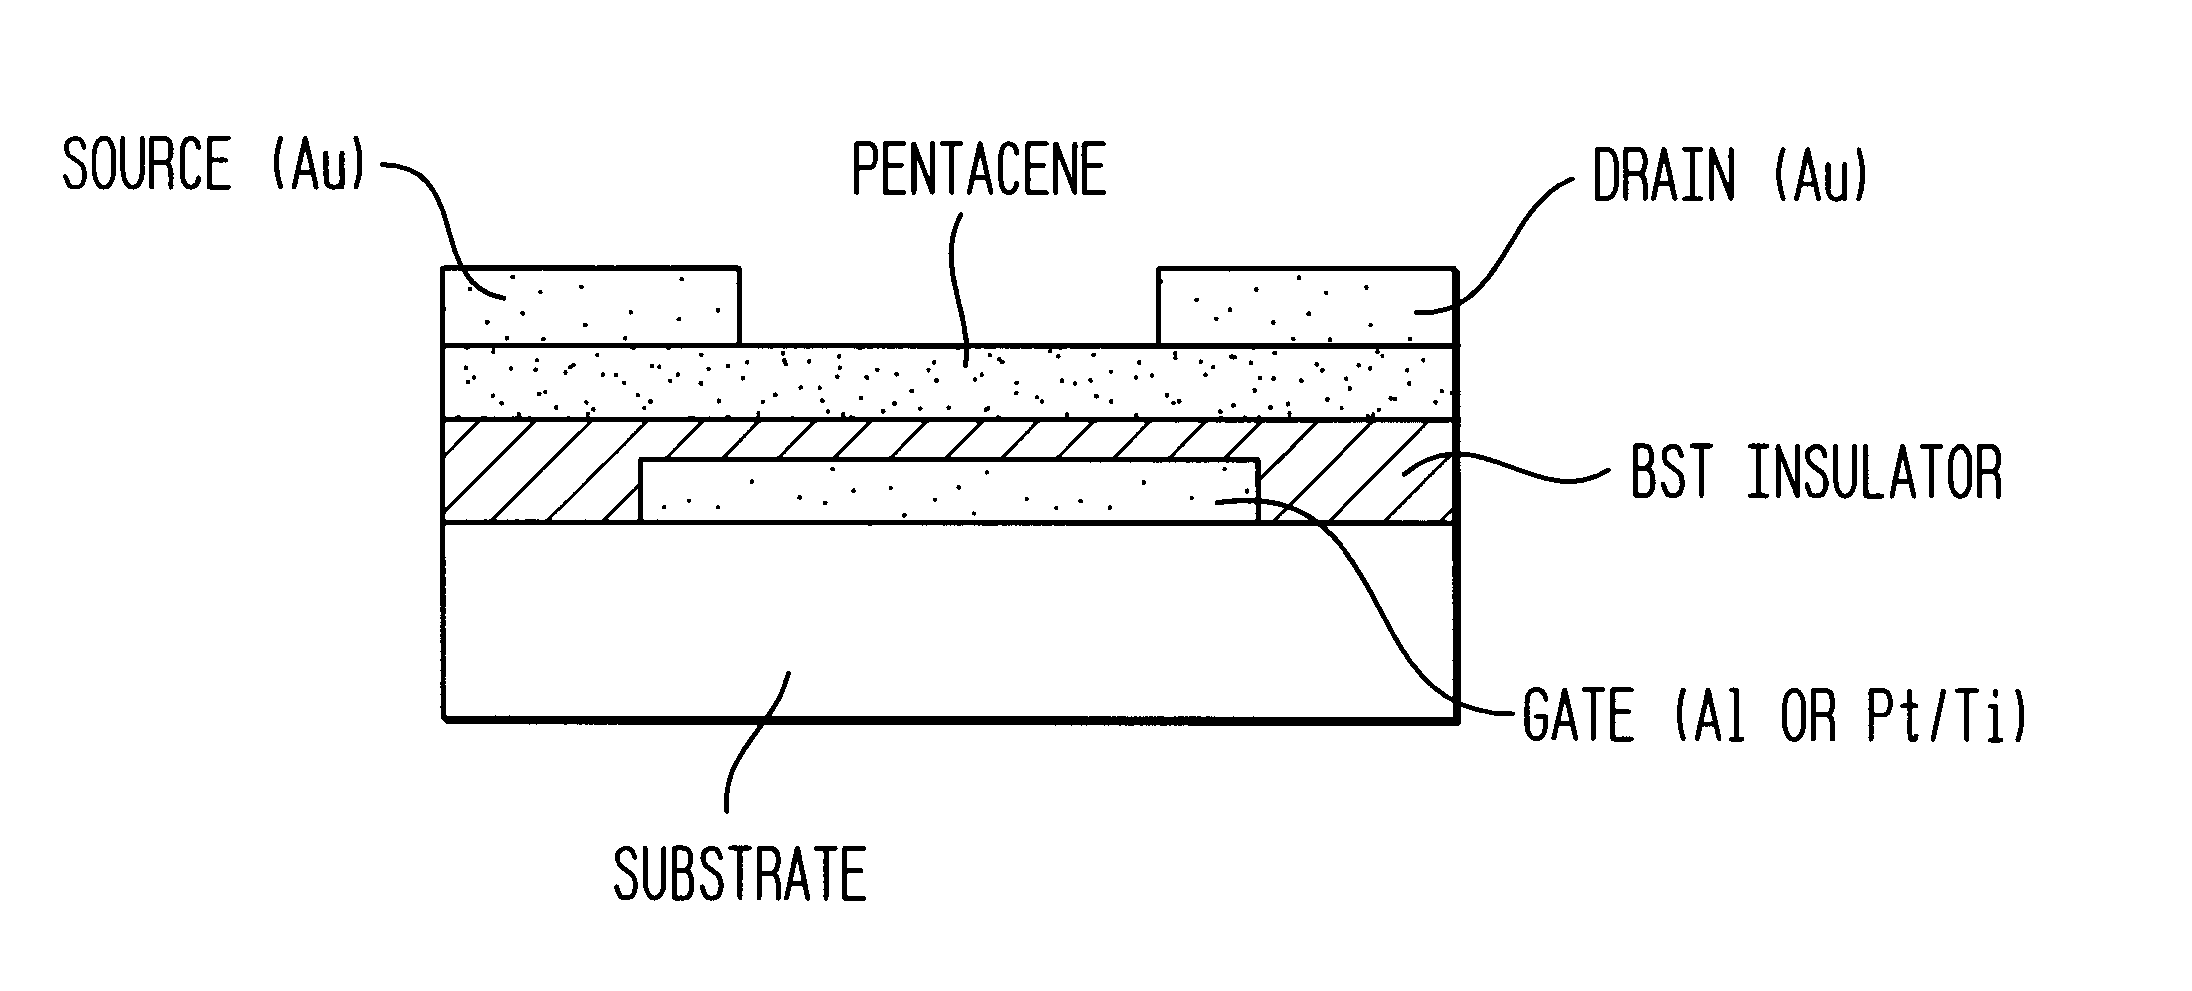 Thin-film field-effect transistor with organic semiconductor requiring low operating voltages